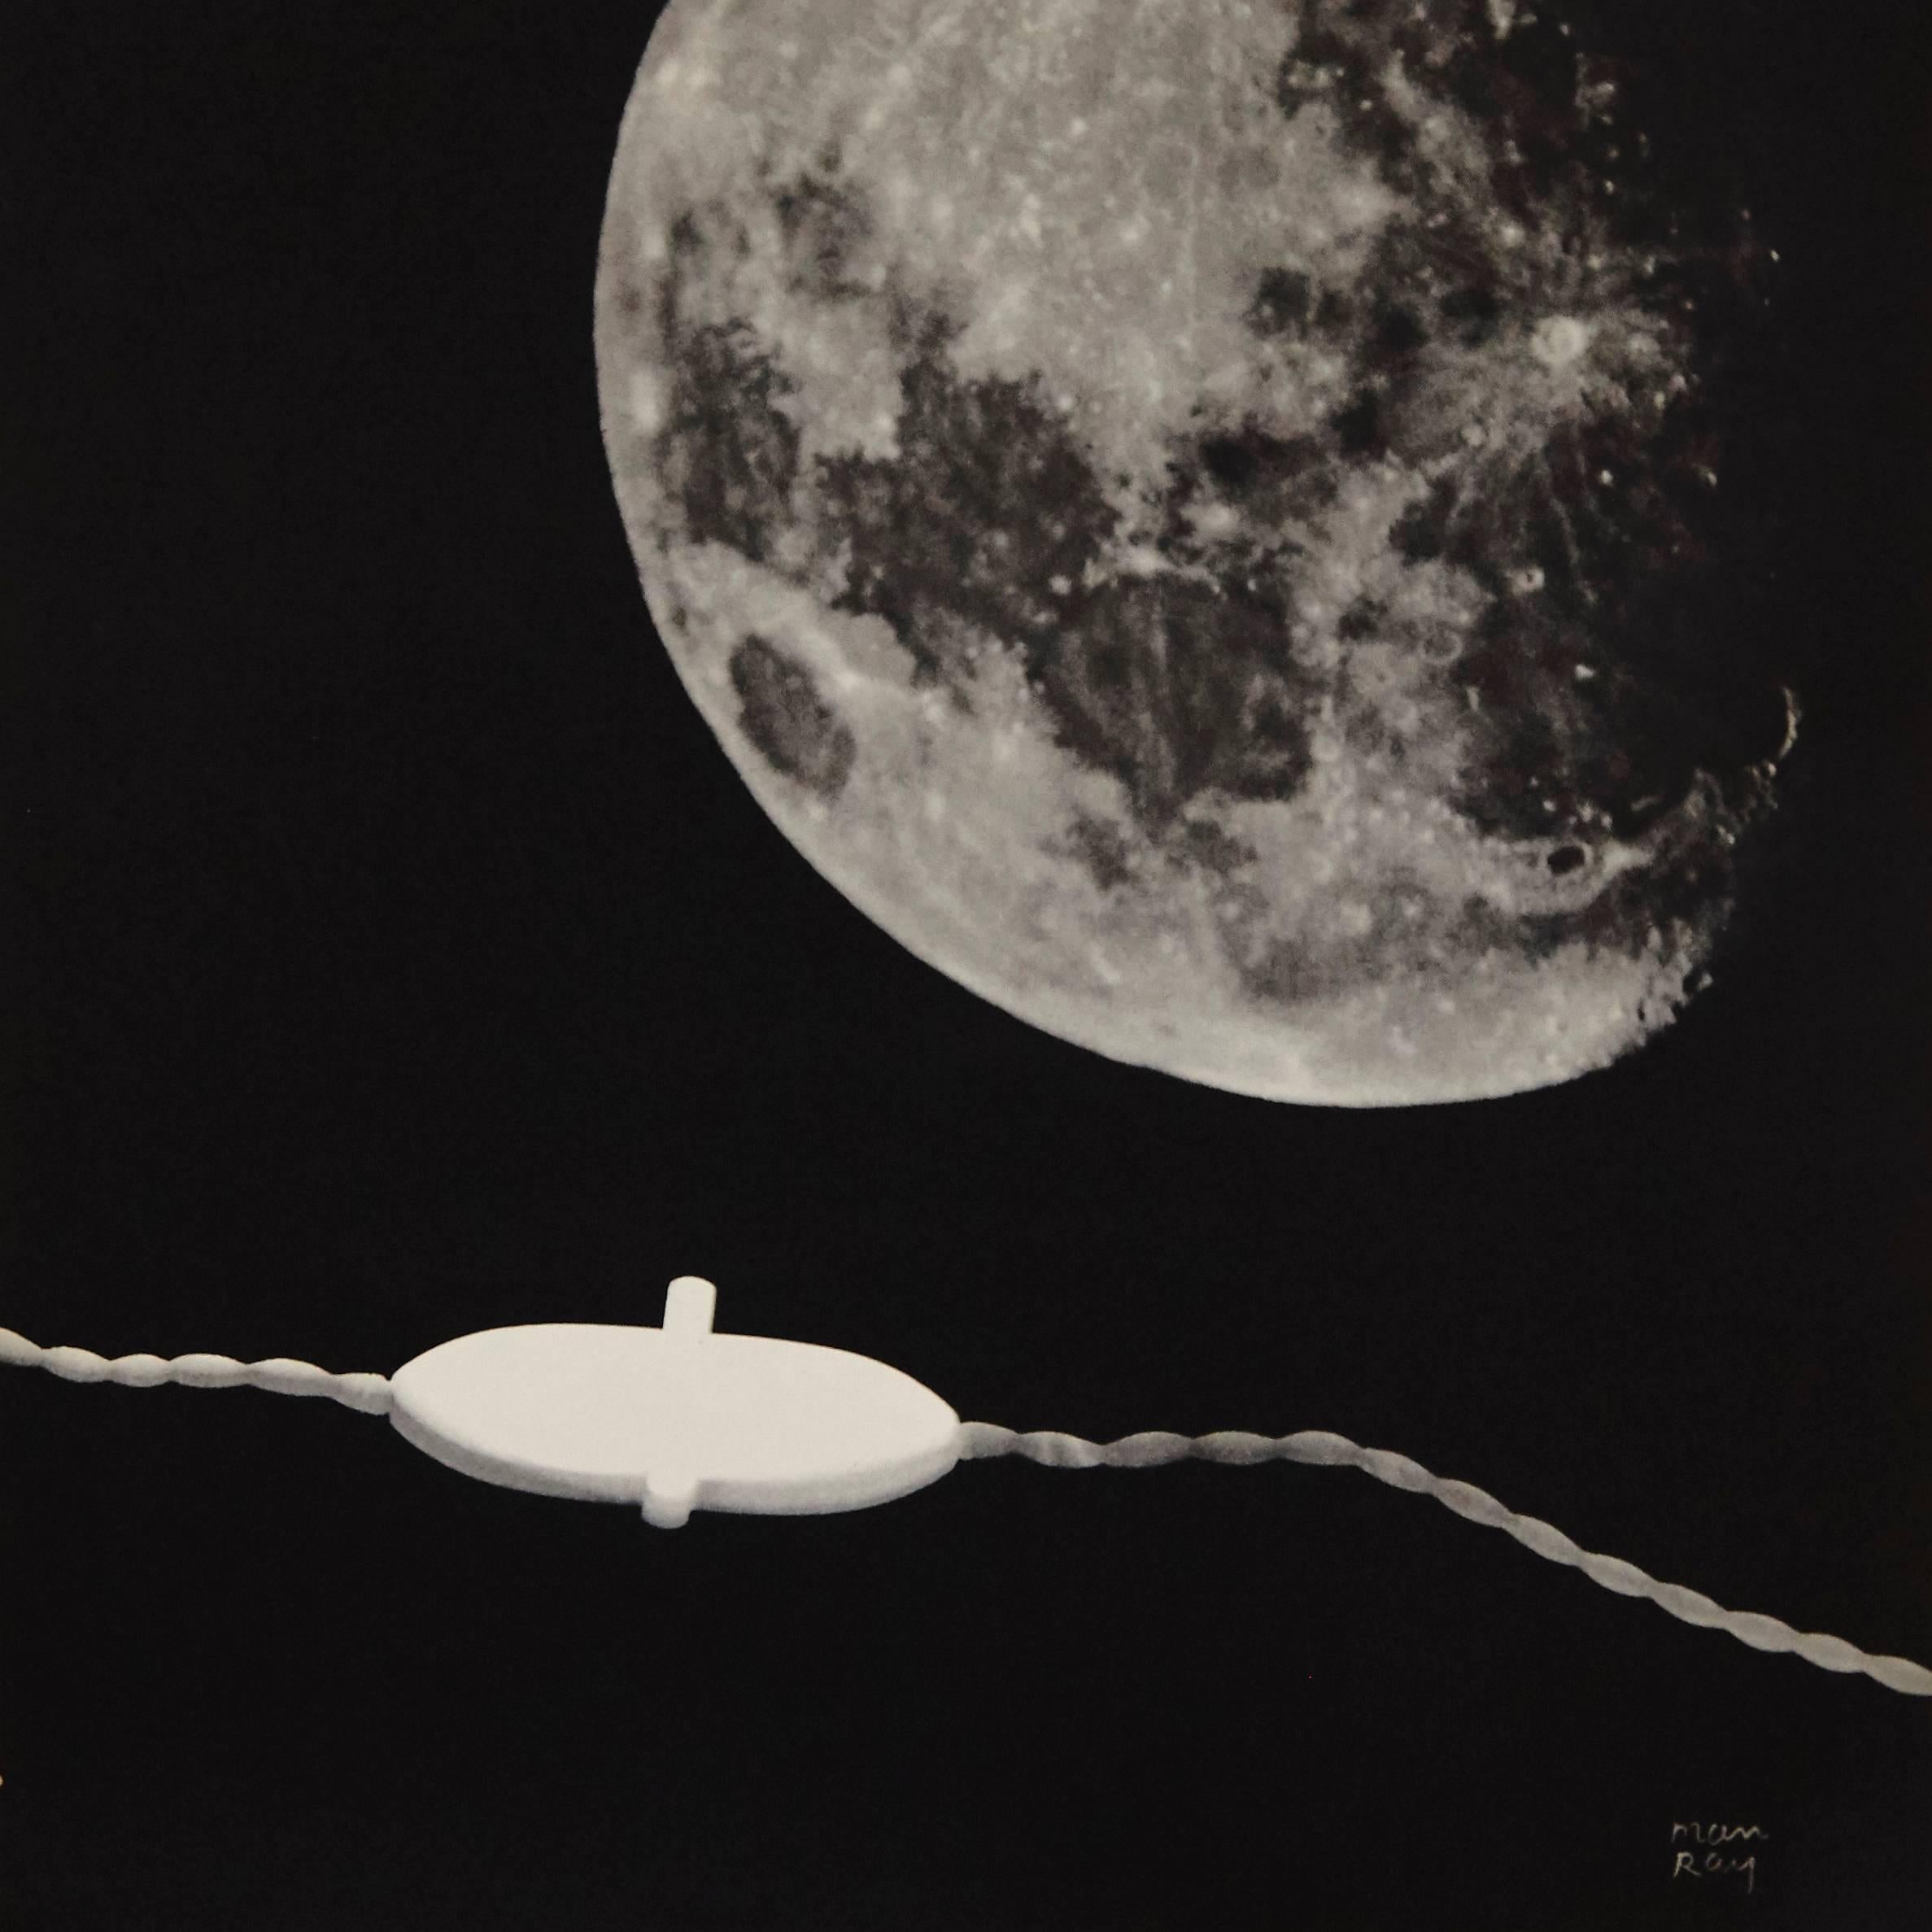 Rayograph Héliogravure by Man Ray for Compagnie Parisienne de Distribution d'Electricité, 1931.

Printed in Heliogravure and signed in the negative.
500 copies.

Man Ray (1890–1976) was an American visual artist who spent most of his career